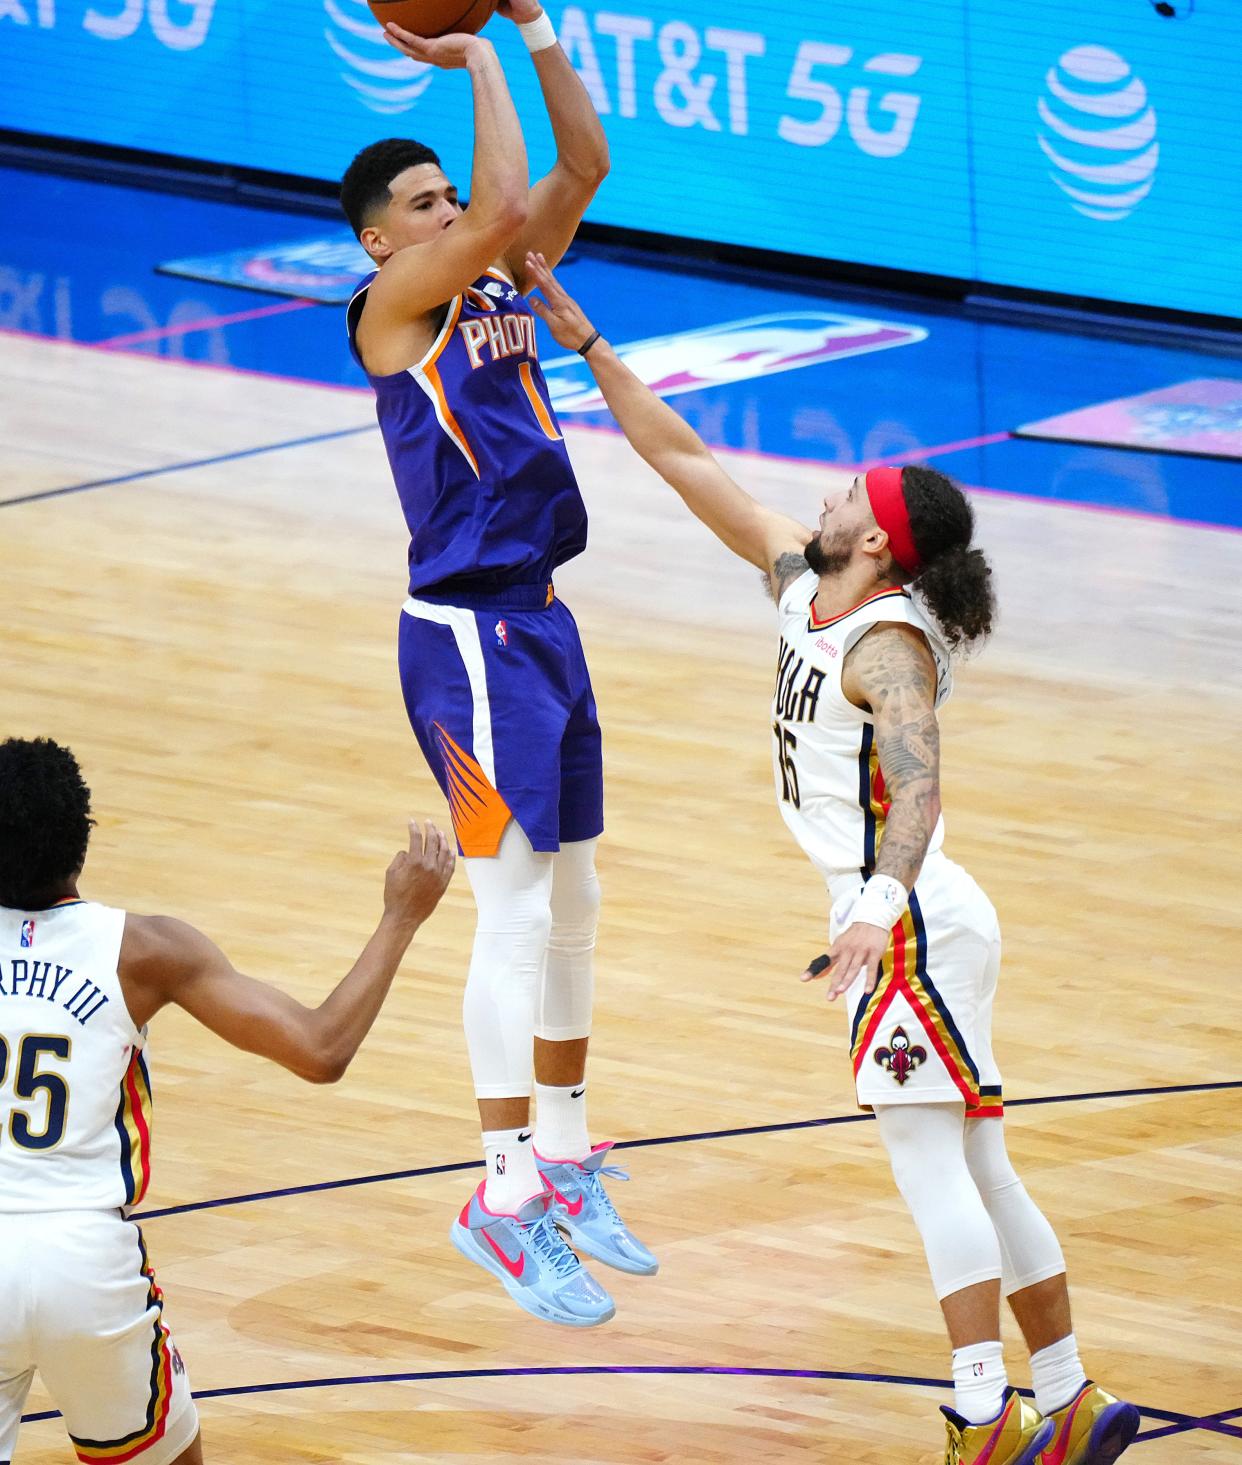 Suns' Devin Booker (1) shoots against Pelicans' Jose Alvarado (15) during Game 6 of the first round of the Western Conference Playoffs.